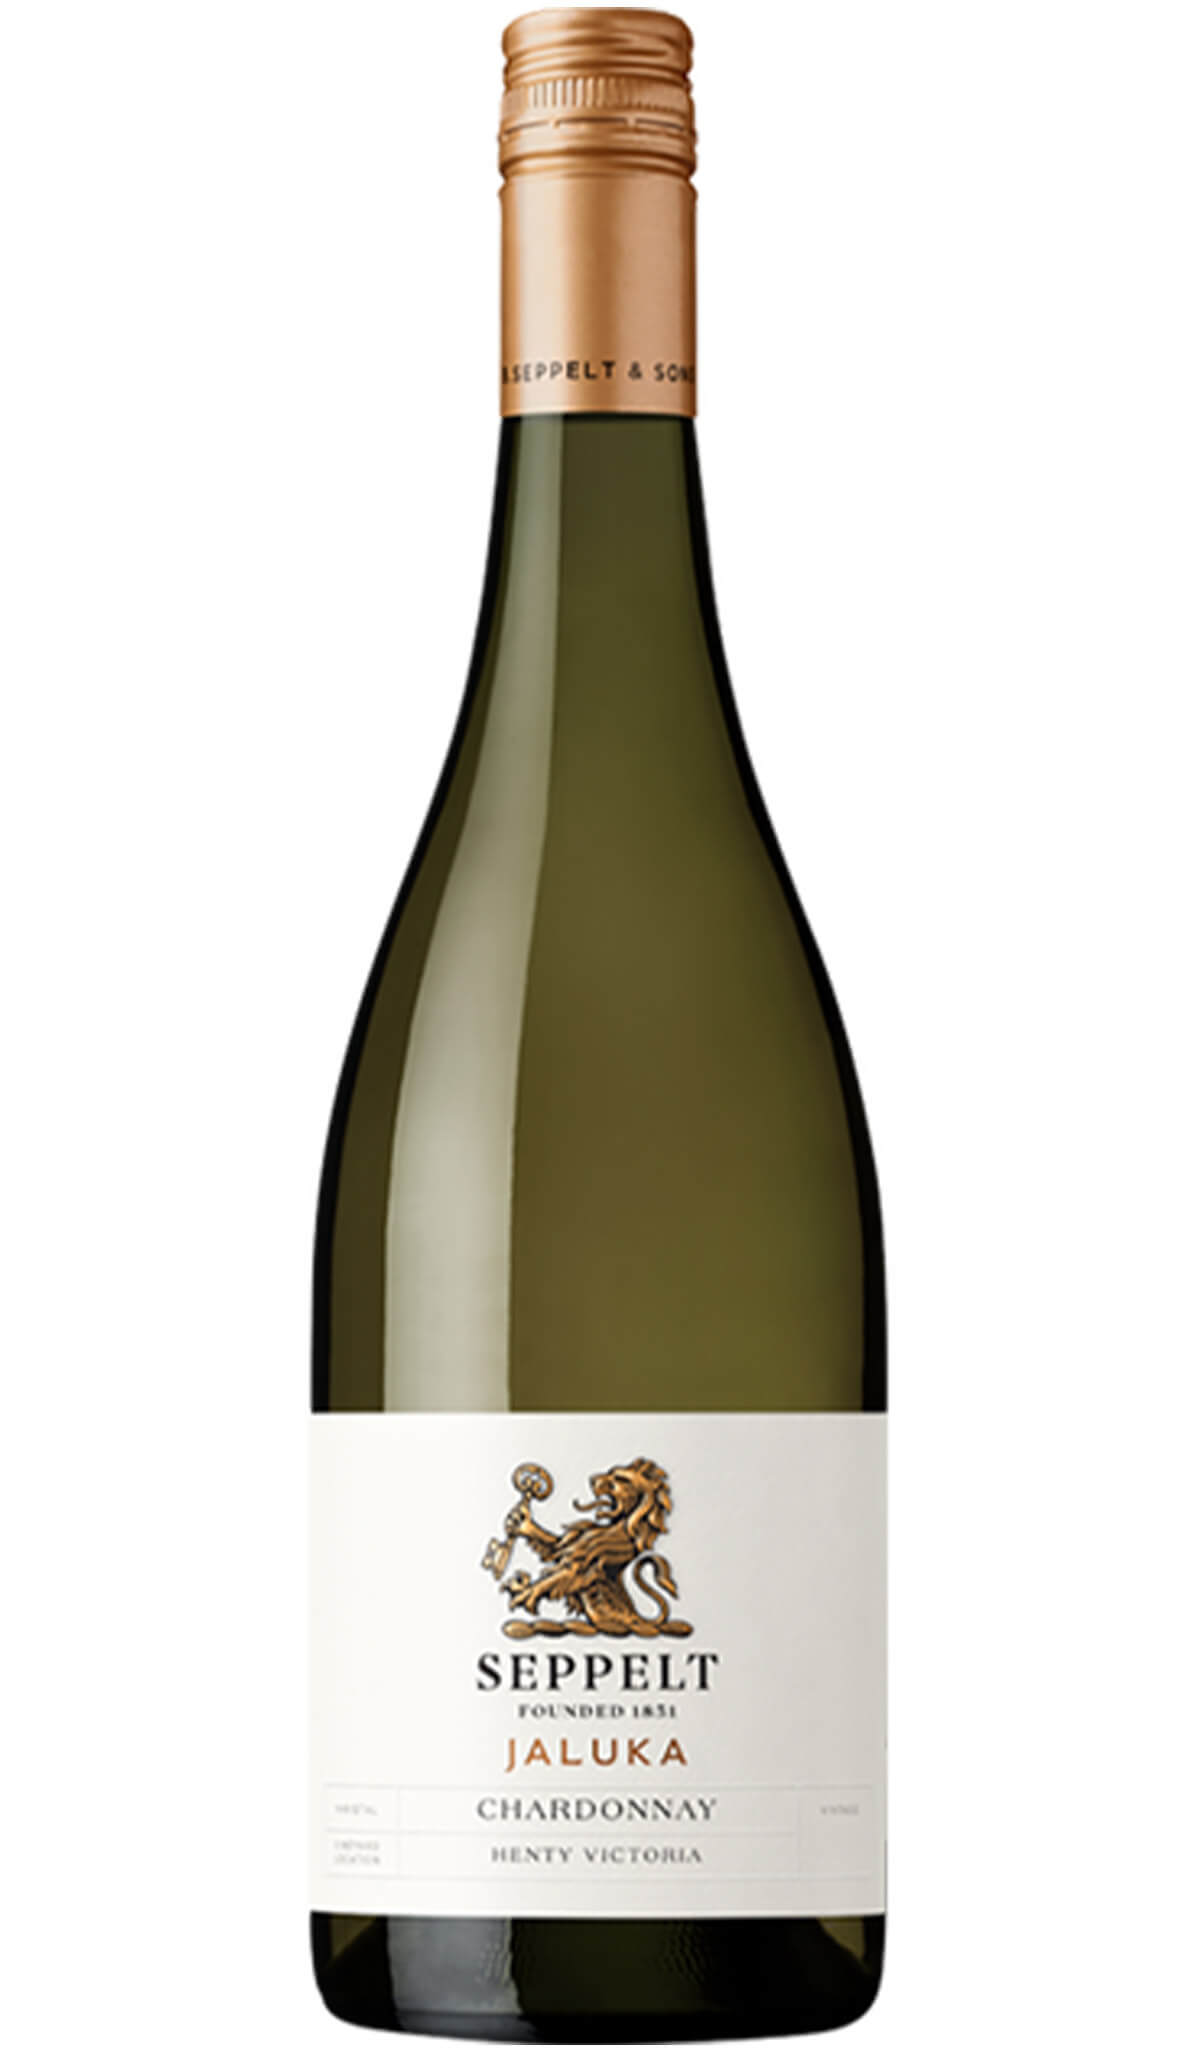 Find out more or buy Seppelt Jaluka Chardonnay 2019 (Henty) online at Wine Sellers Direct - Australia’s independent liquor specialists.